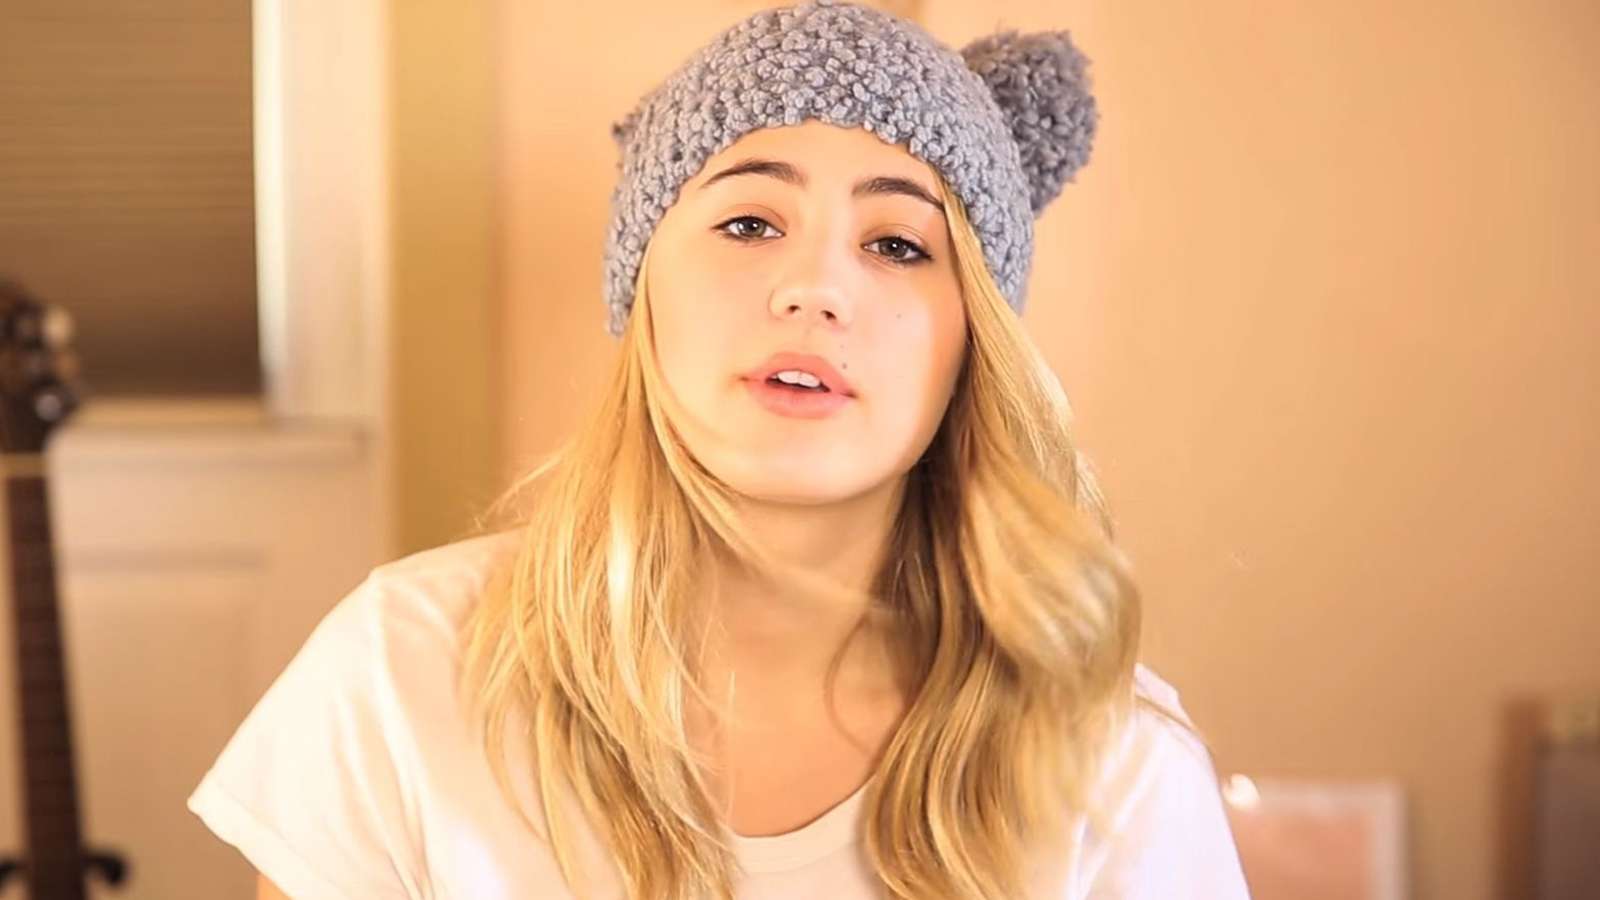 Lia Marie Johnson filming a video for her YouTube channel.